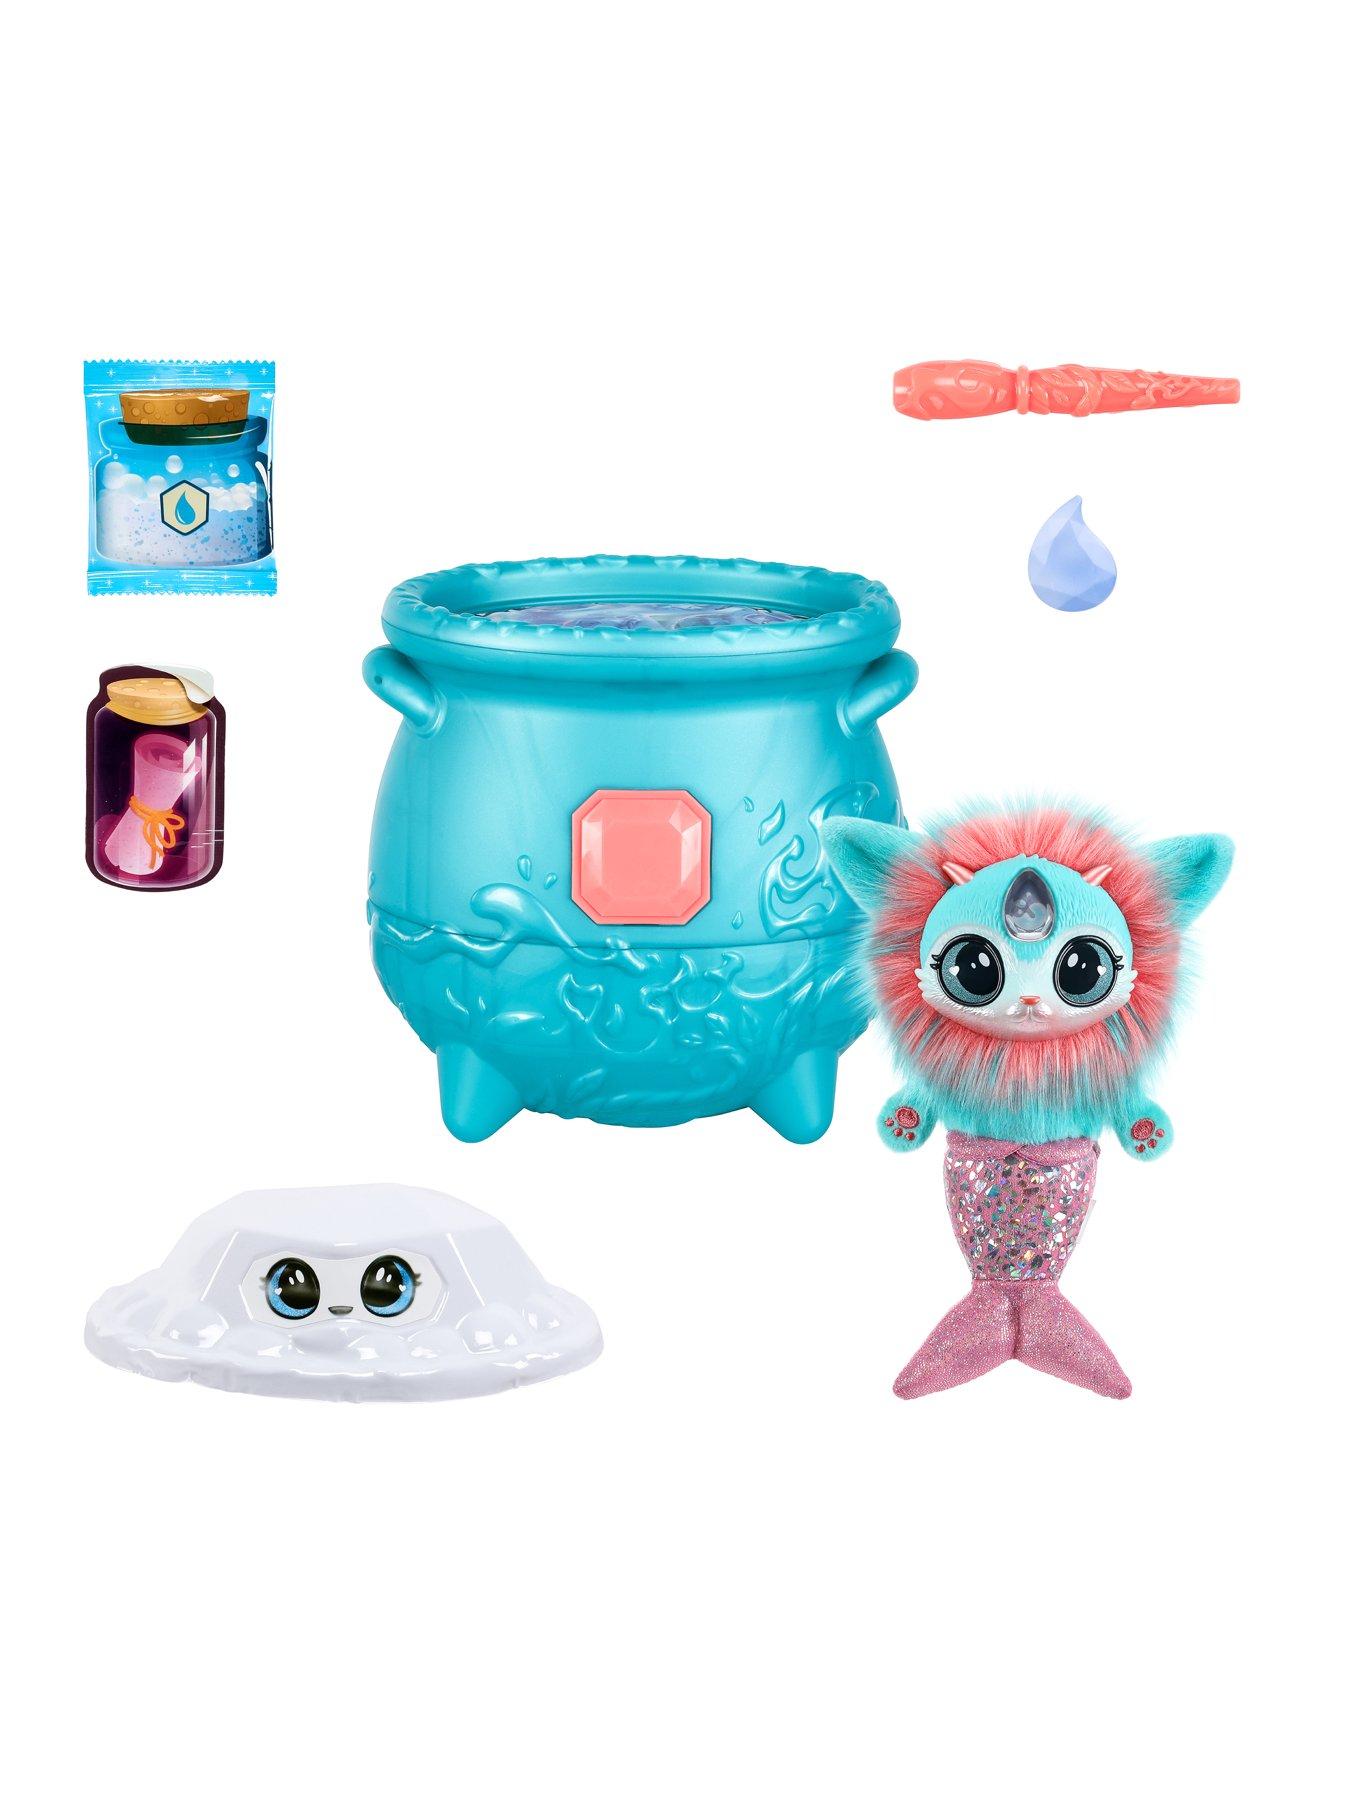 6 Magic Mixies “Magical Gem Surprise” Water & Fire Cauldrons Series 2  Adventure Fun Toy review! 